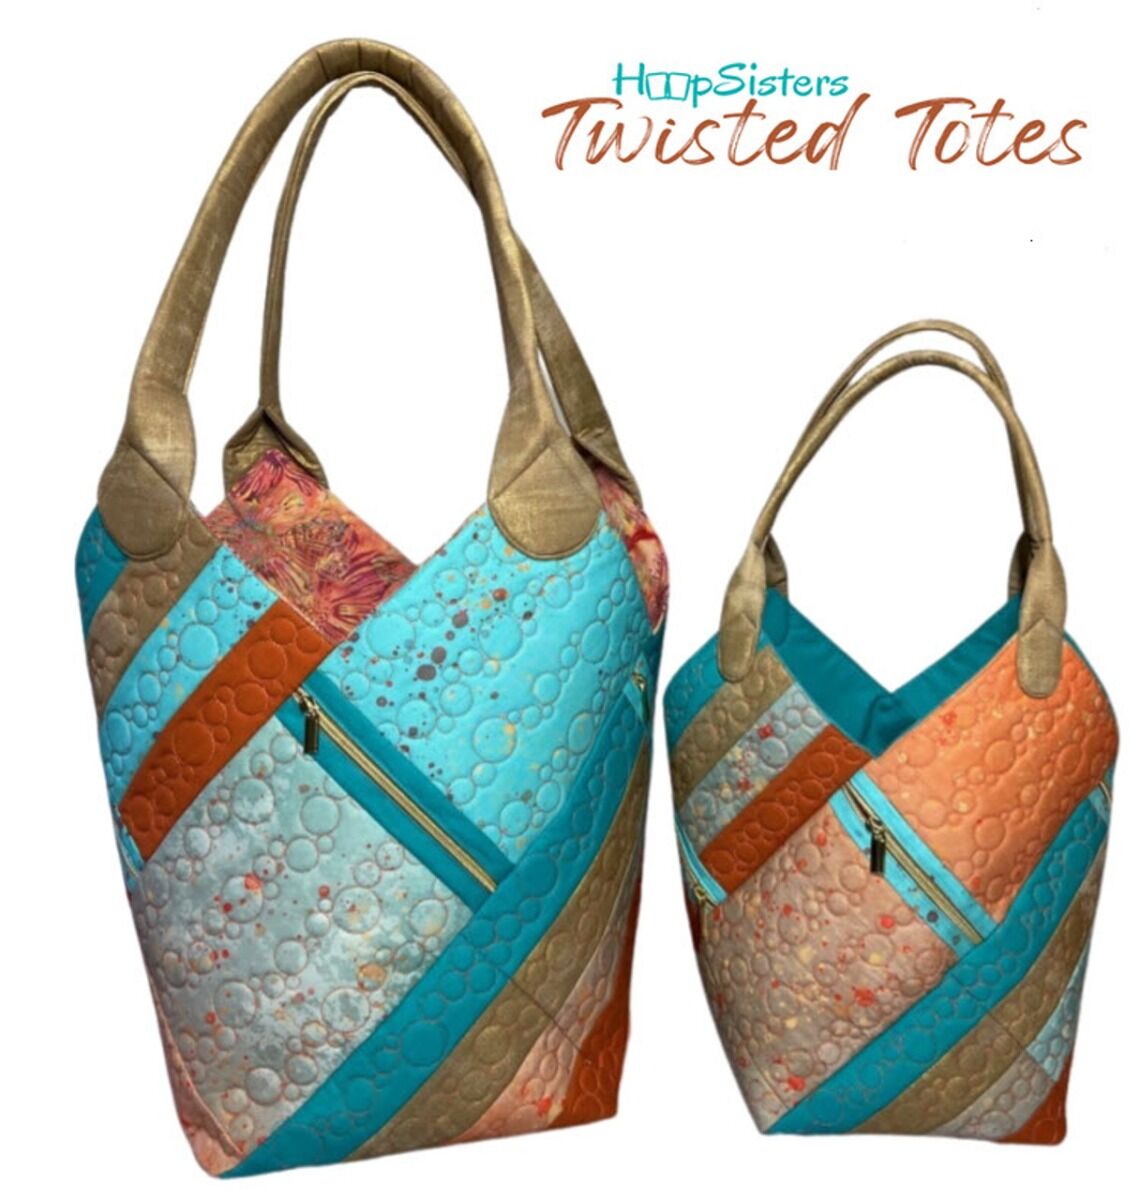 HoopSisters Twisted Totes Design - USB